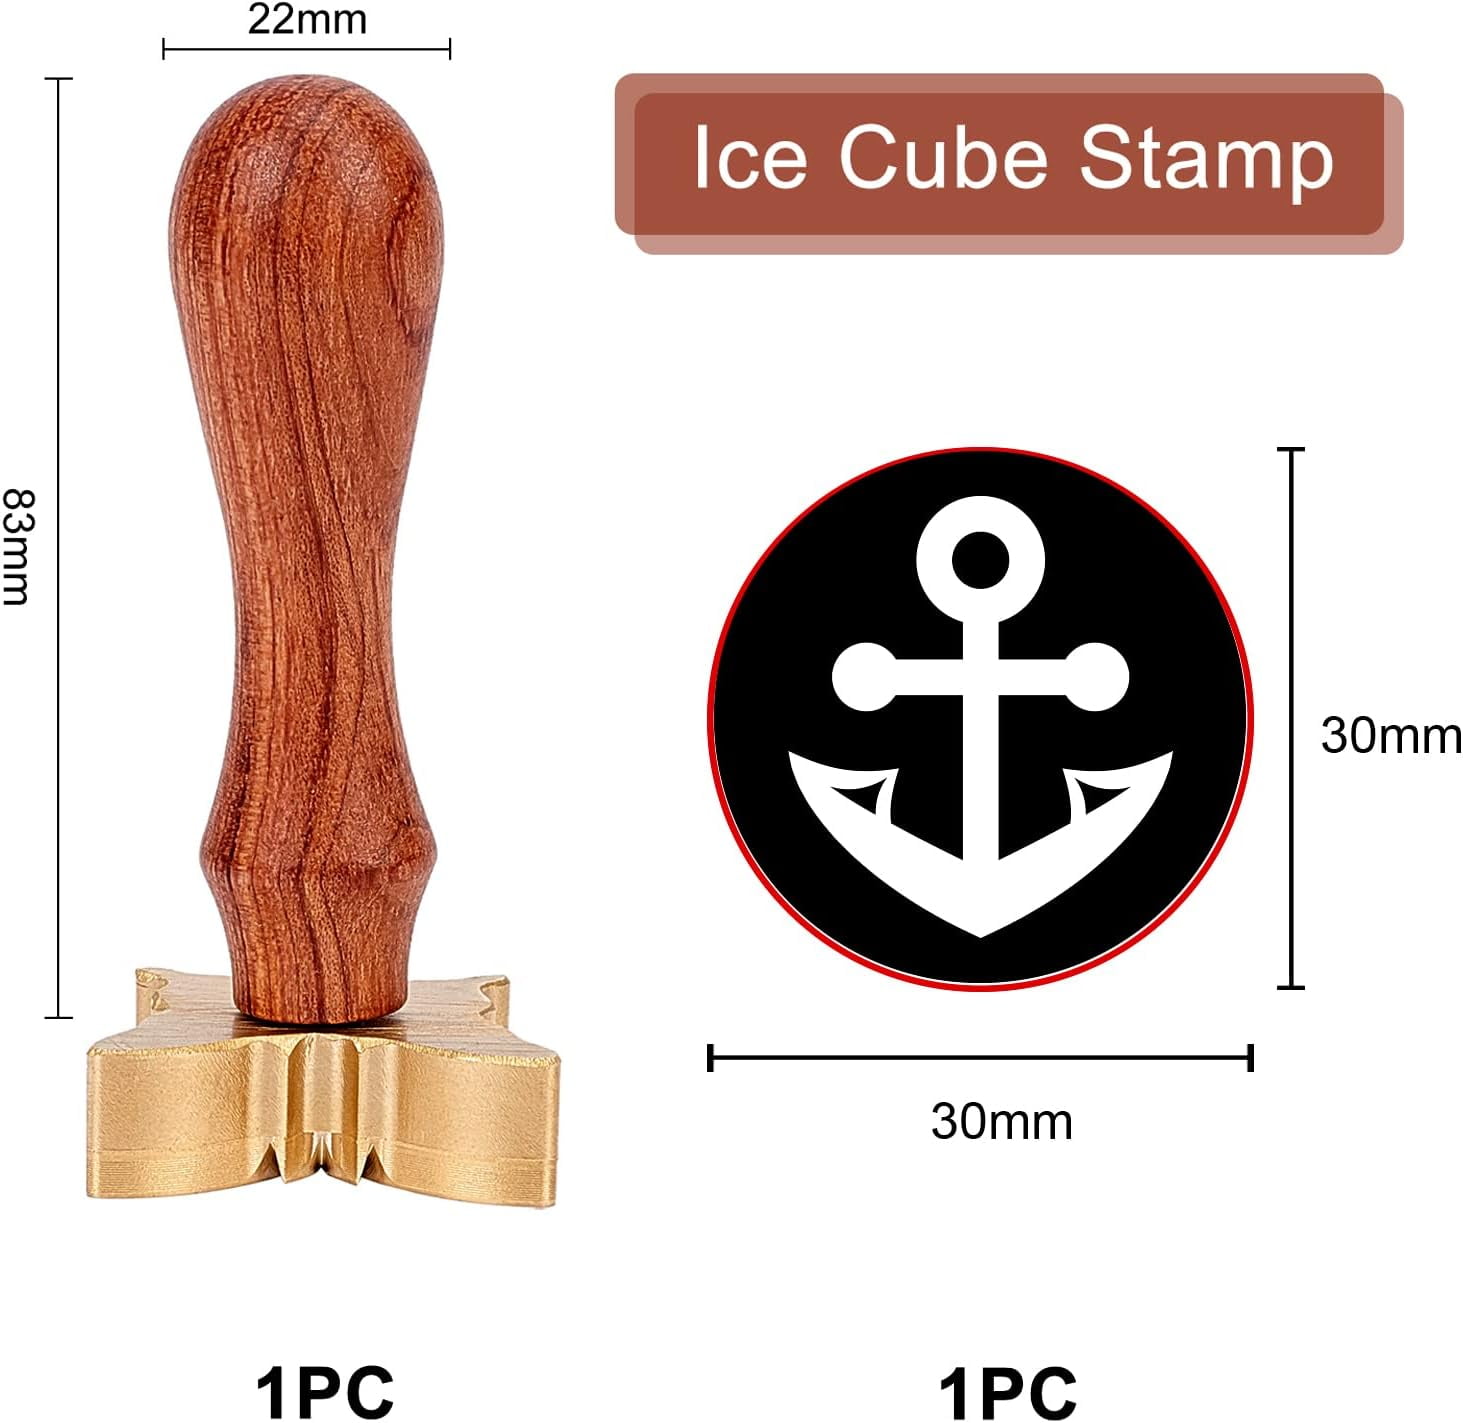 Ice Stamp 1.2 inch Ice Cube Stamp Letter R Ice Stamp Cocktail Ice Branding Stamp Ice Block Stamp Cocktail Seal Stamp for Ice Cubes Making DIY Crafting